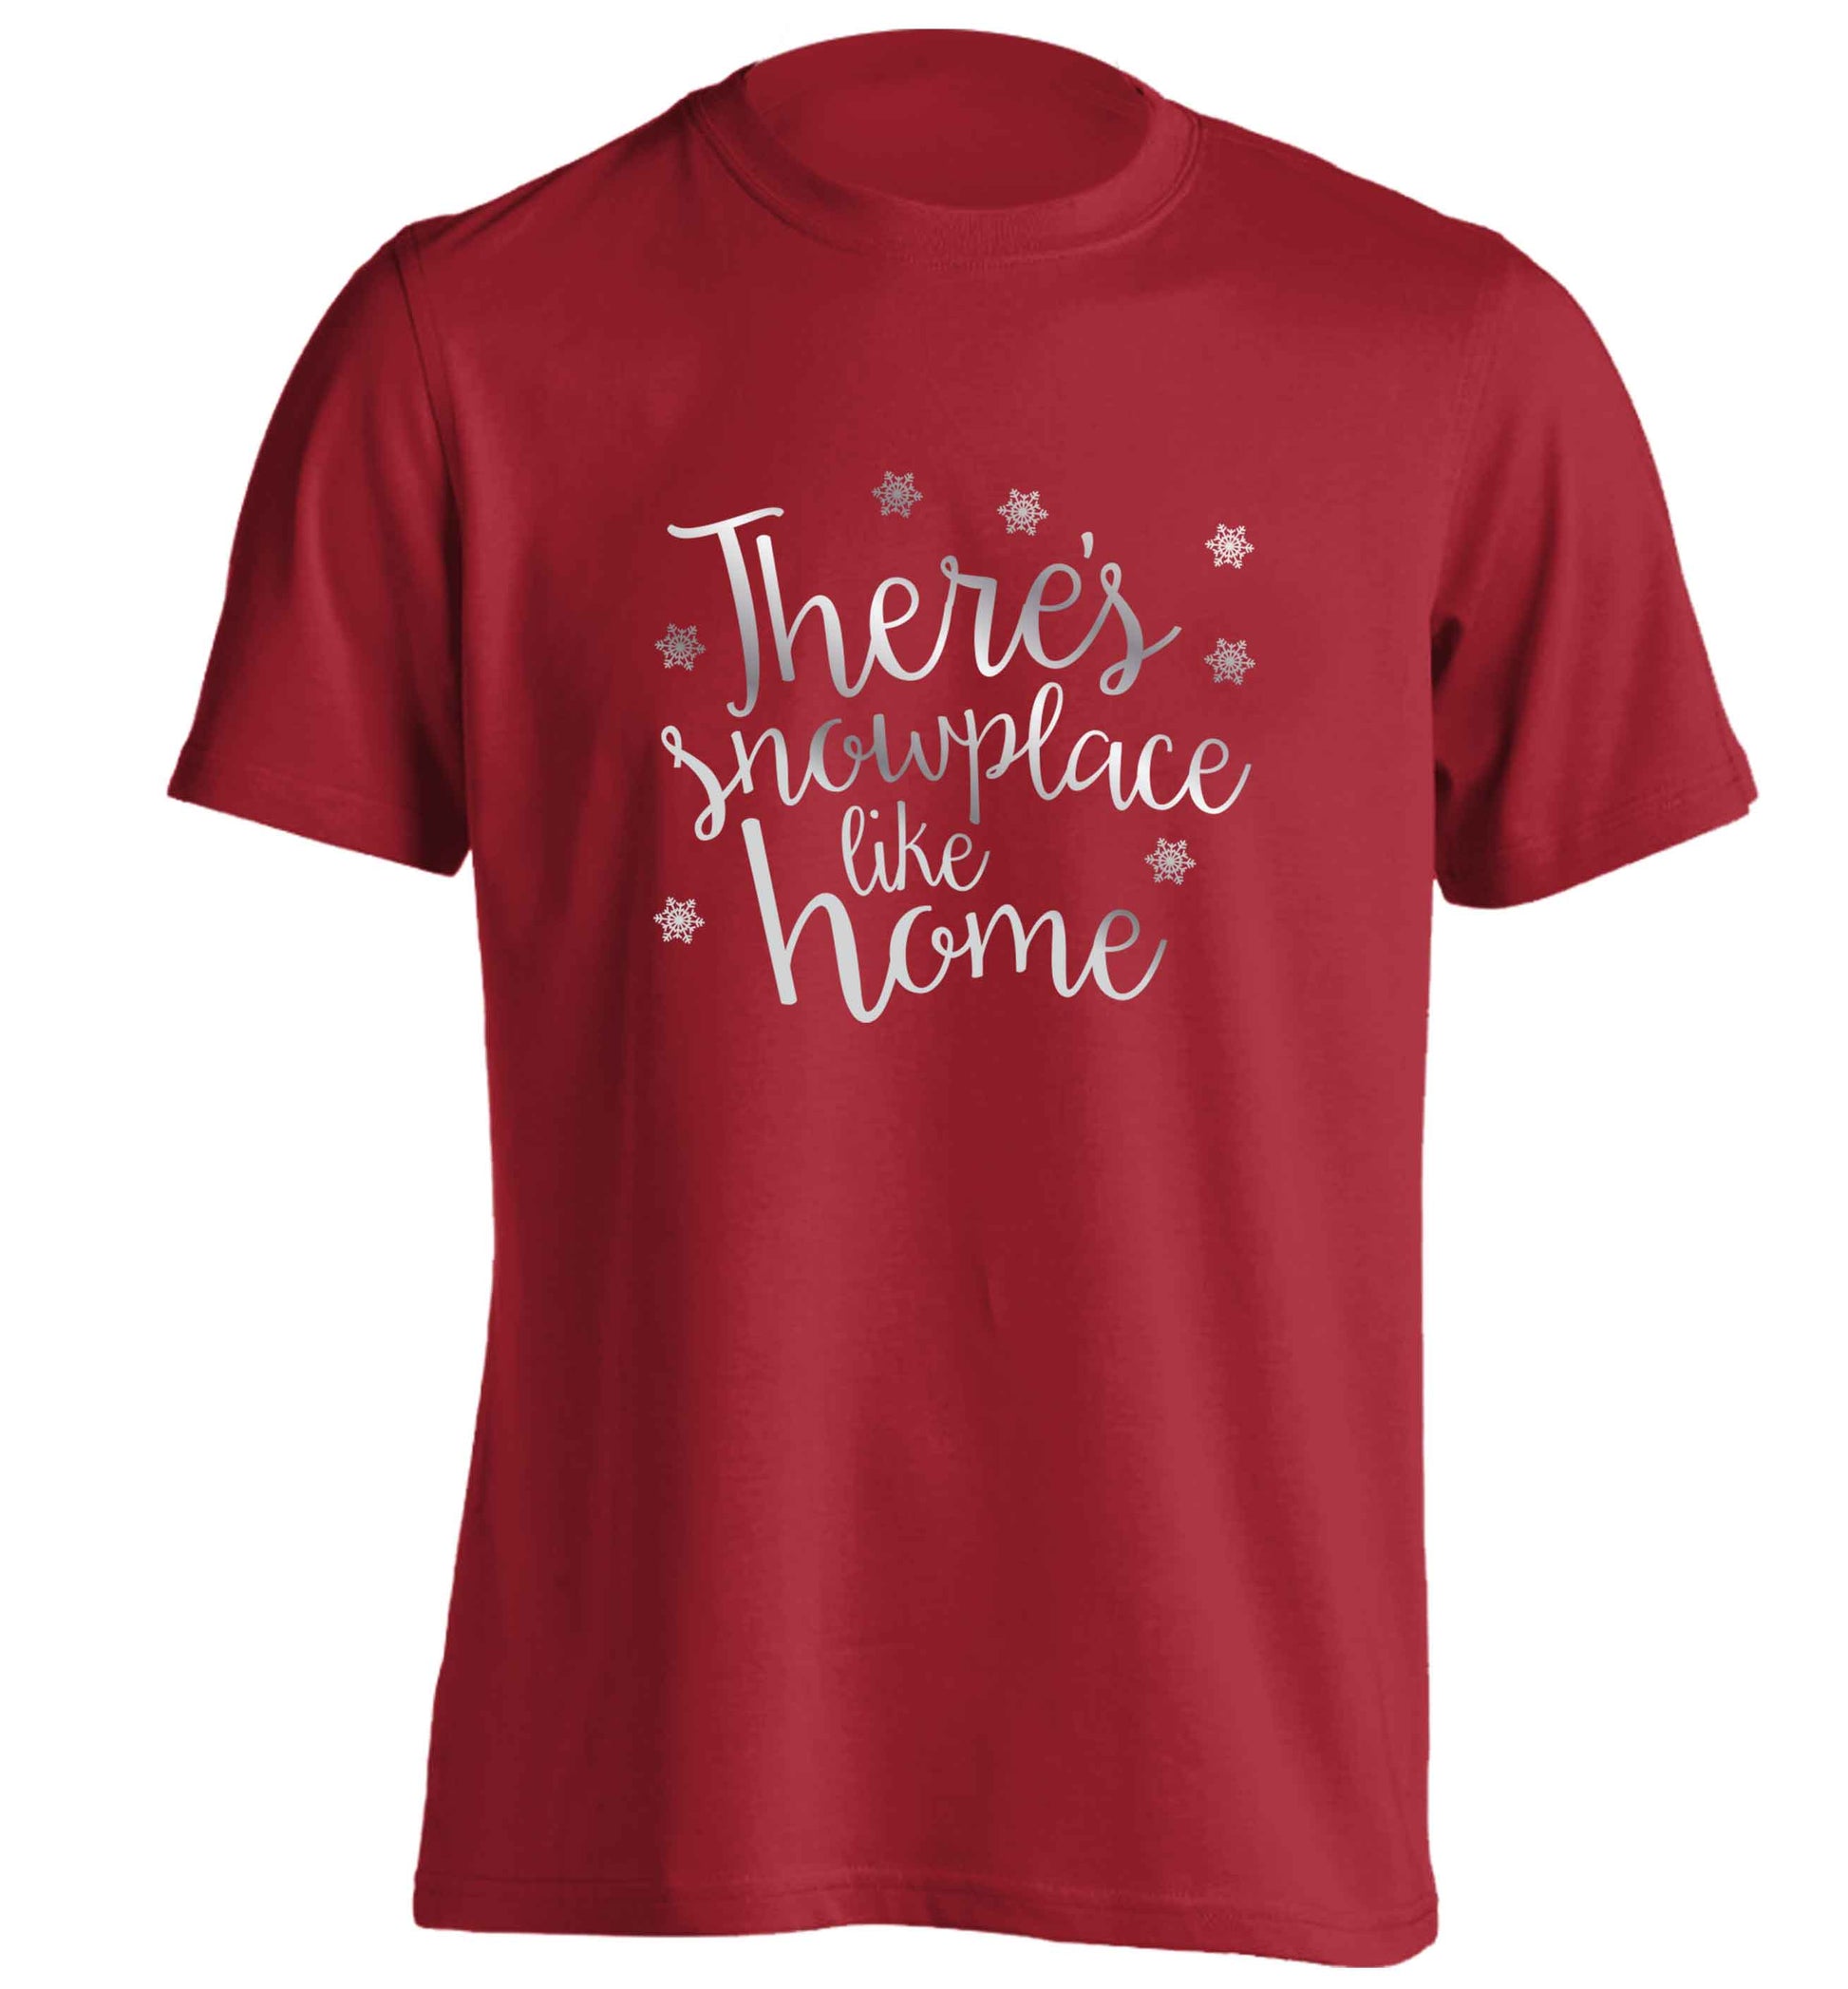 There's snowplace like home - metallic silver adults unisex red Tshirt 2XL